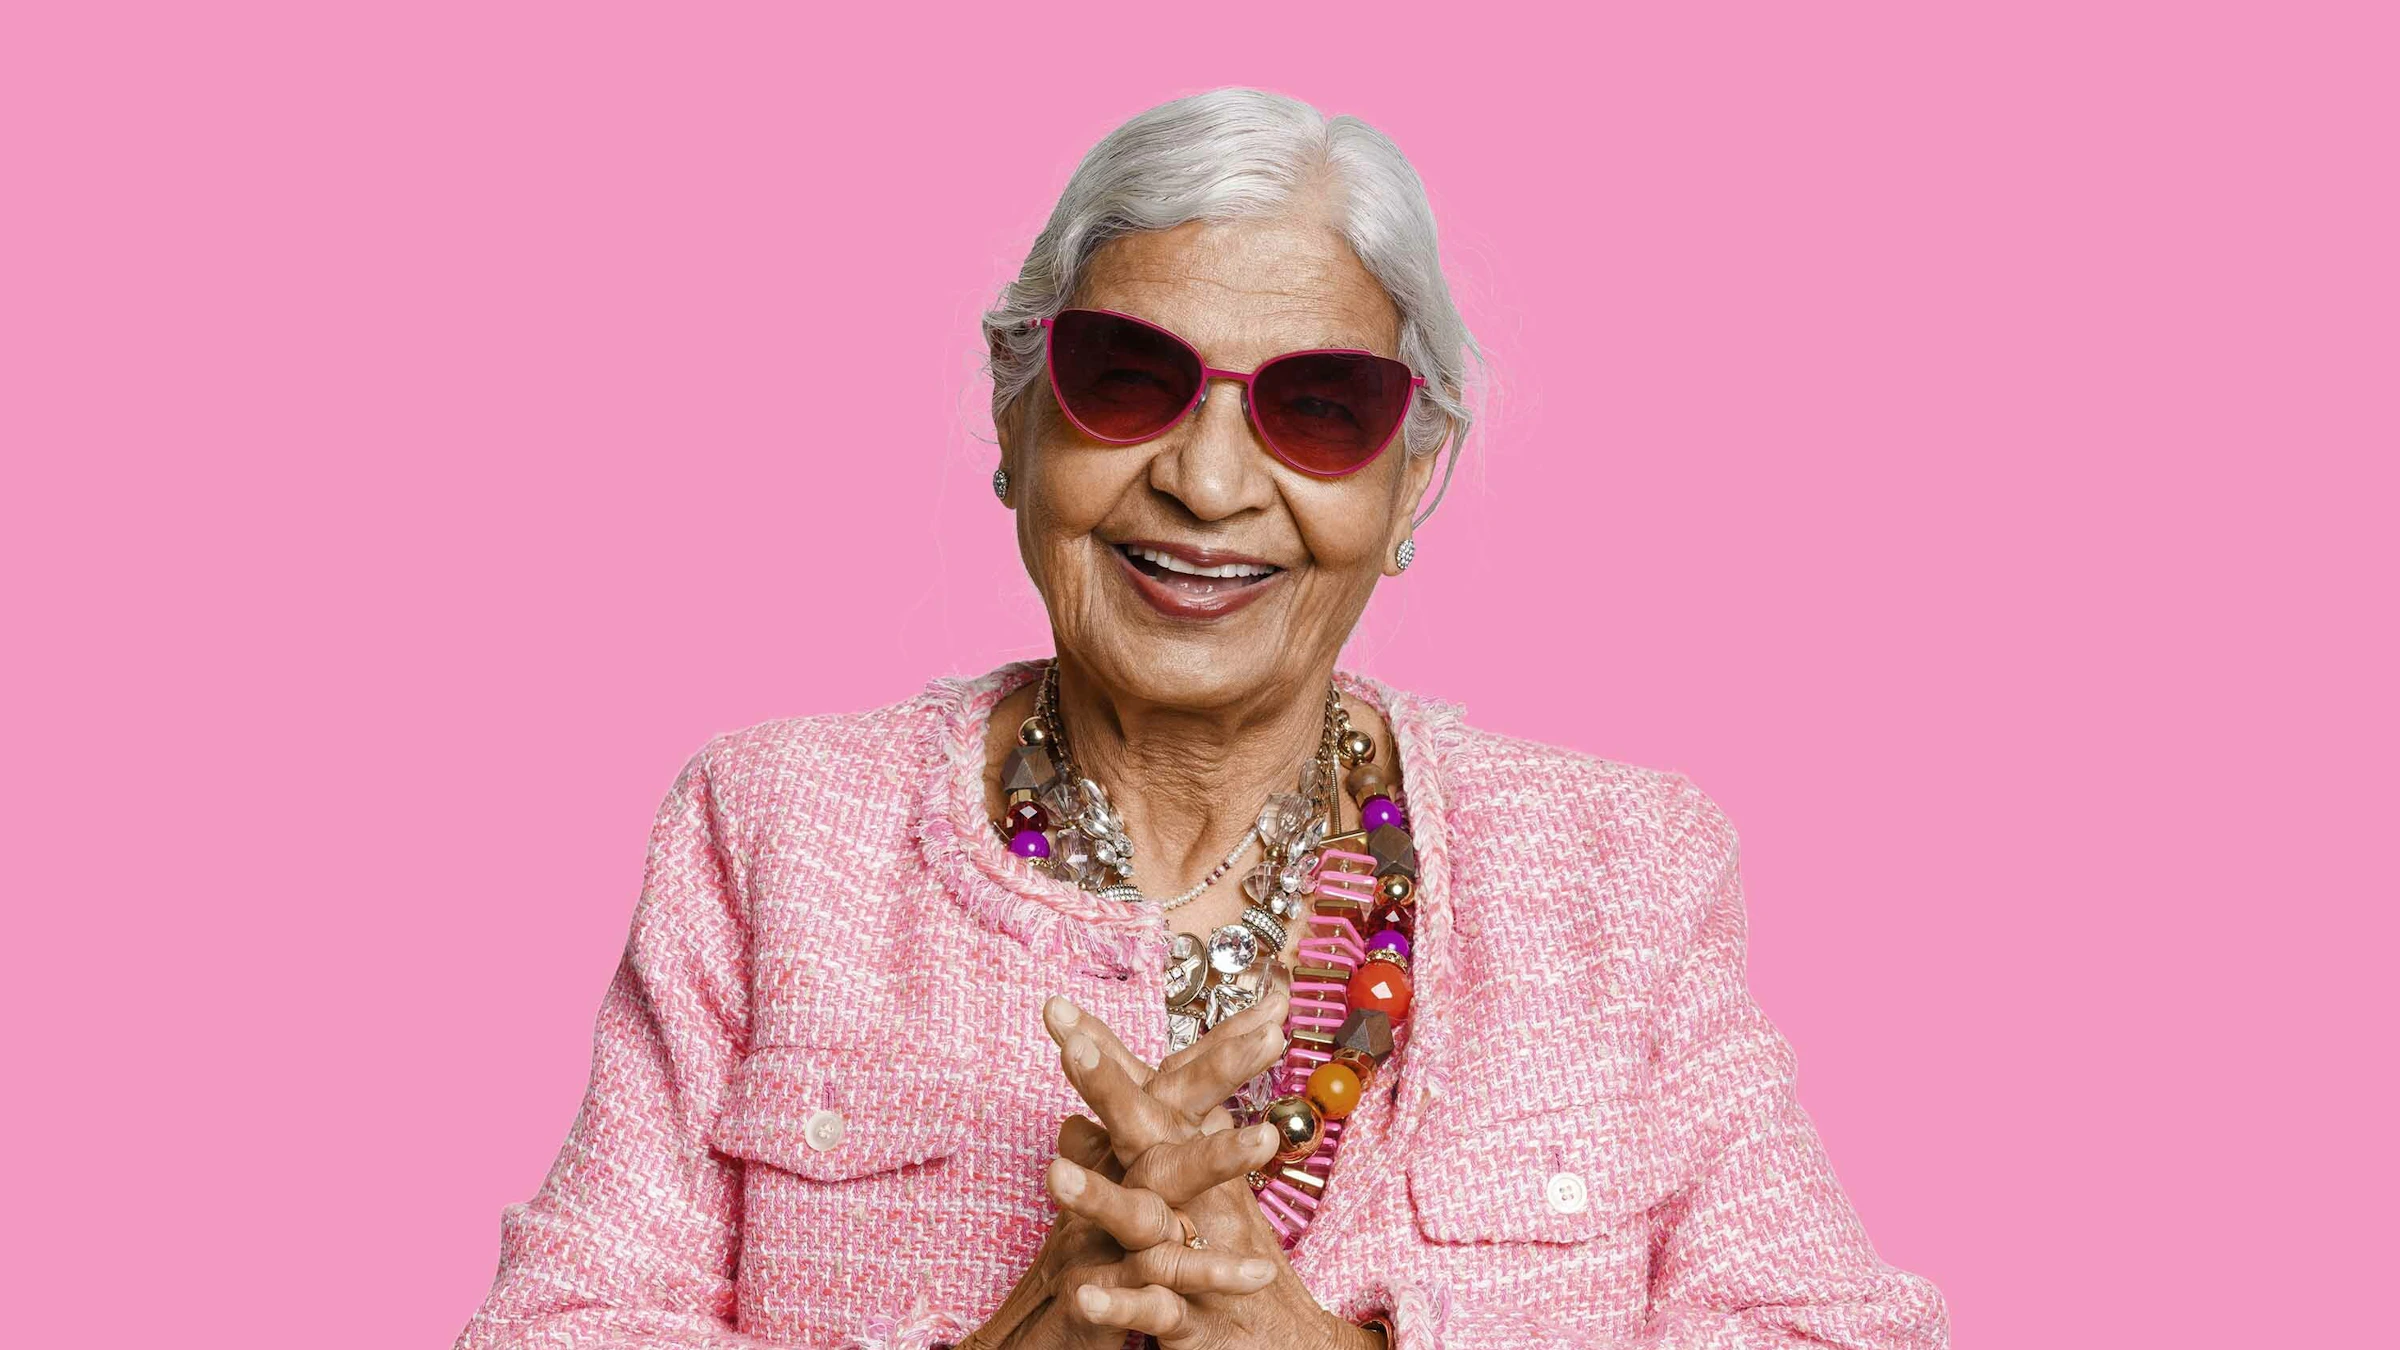 Old woman with pink jacket and matching sunglasses on a pink background